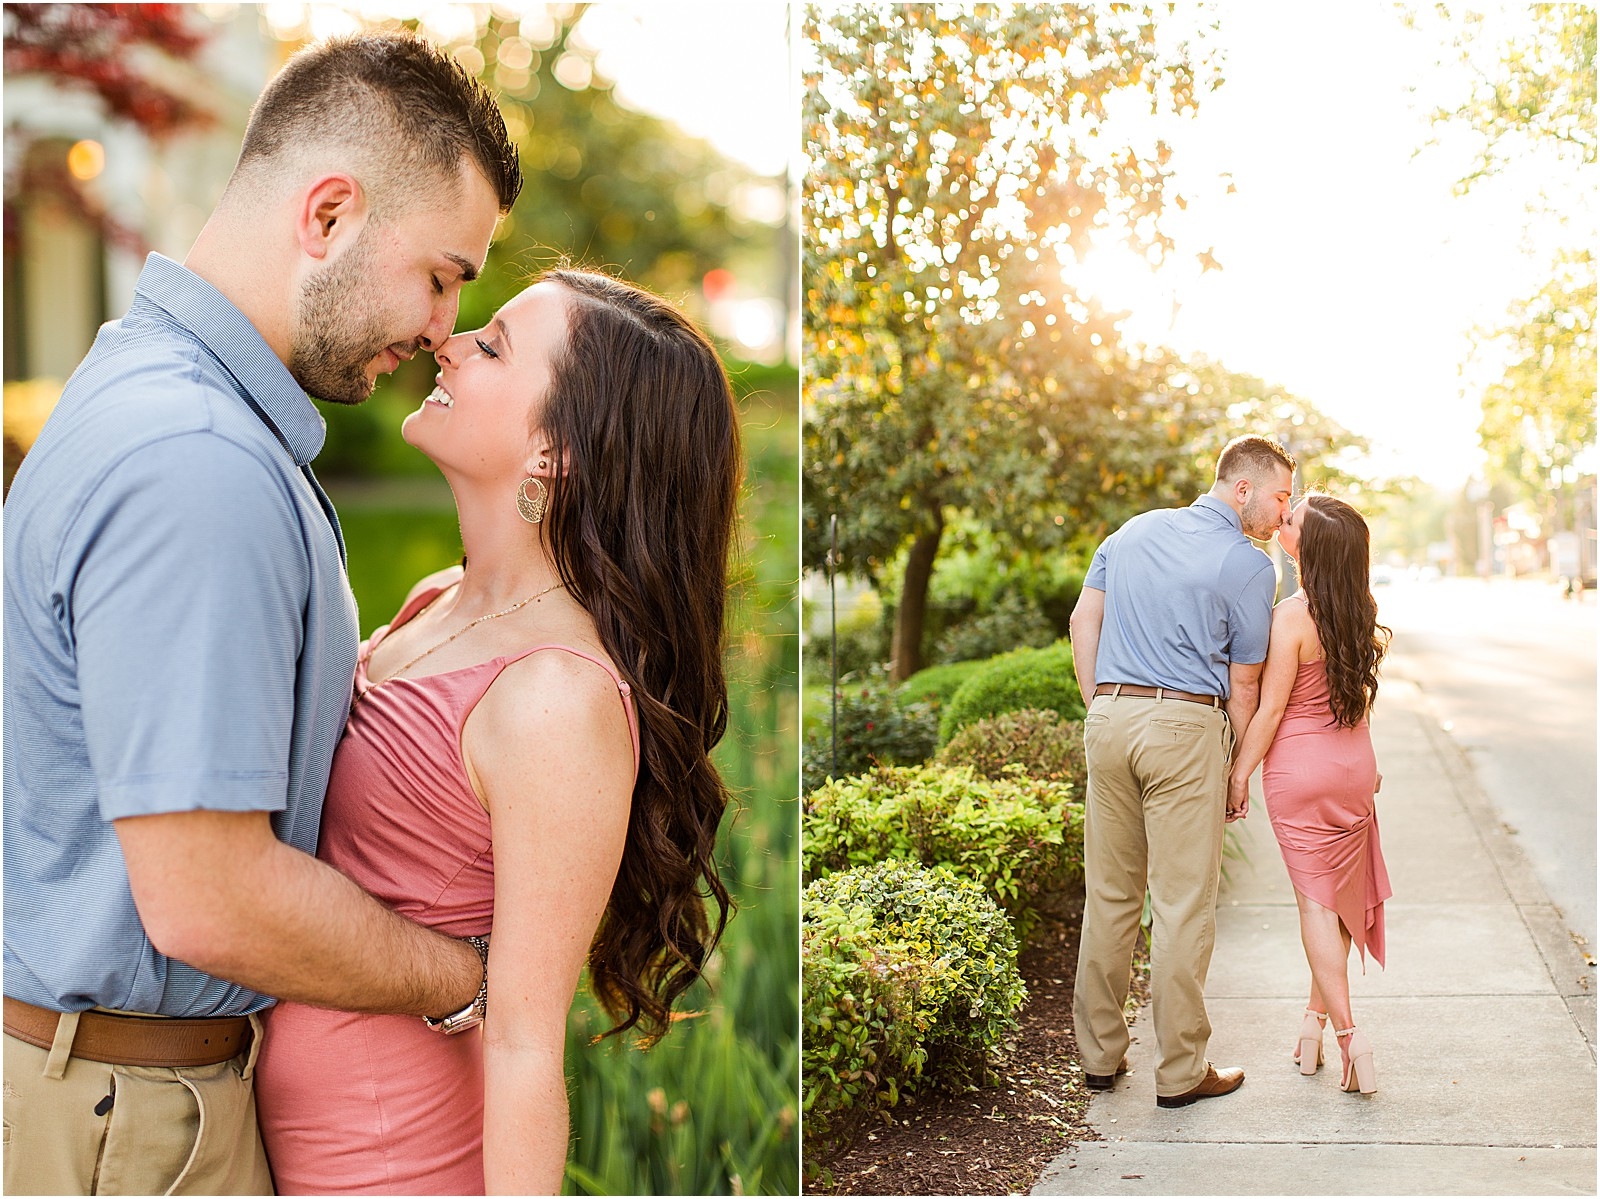 Downtown Newburgh Engagement Session | Matt and Blaire | Bret and Brandie Photography027.jpg